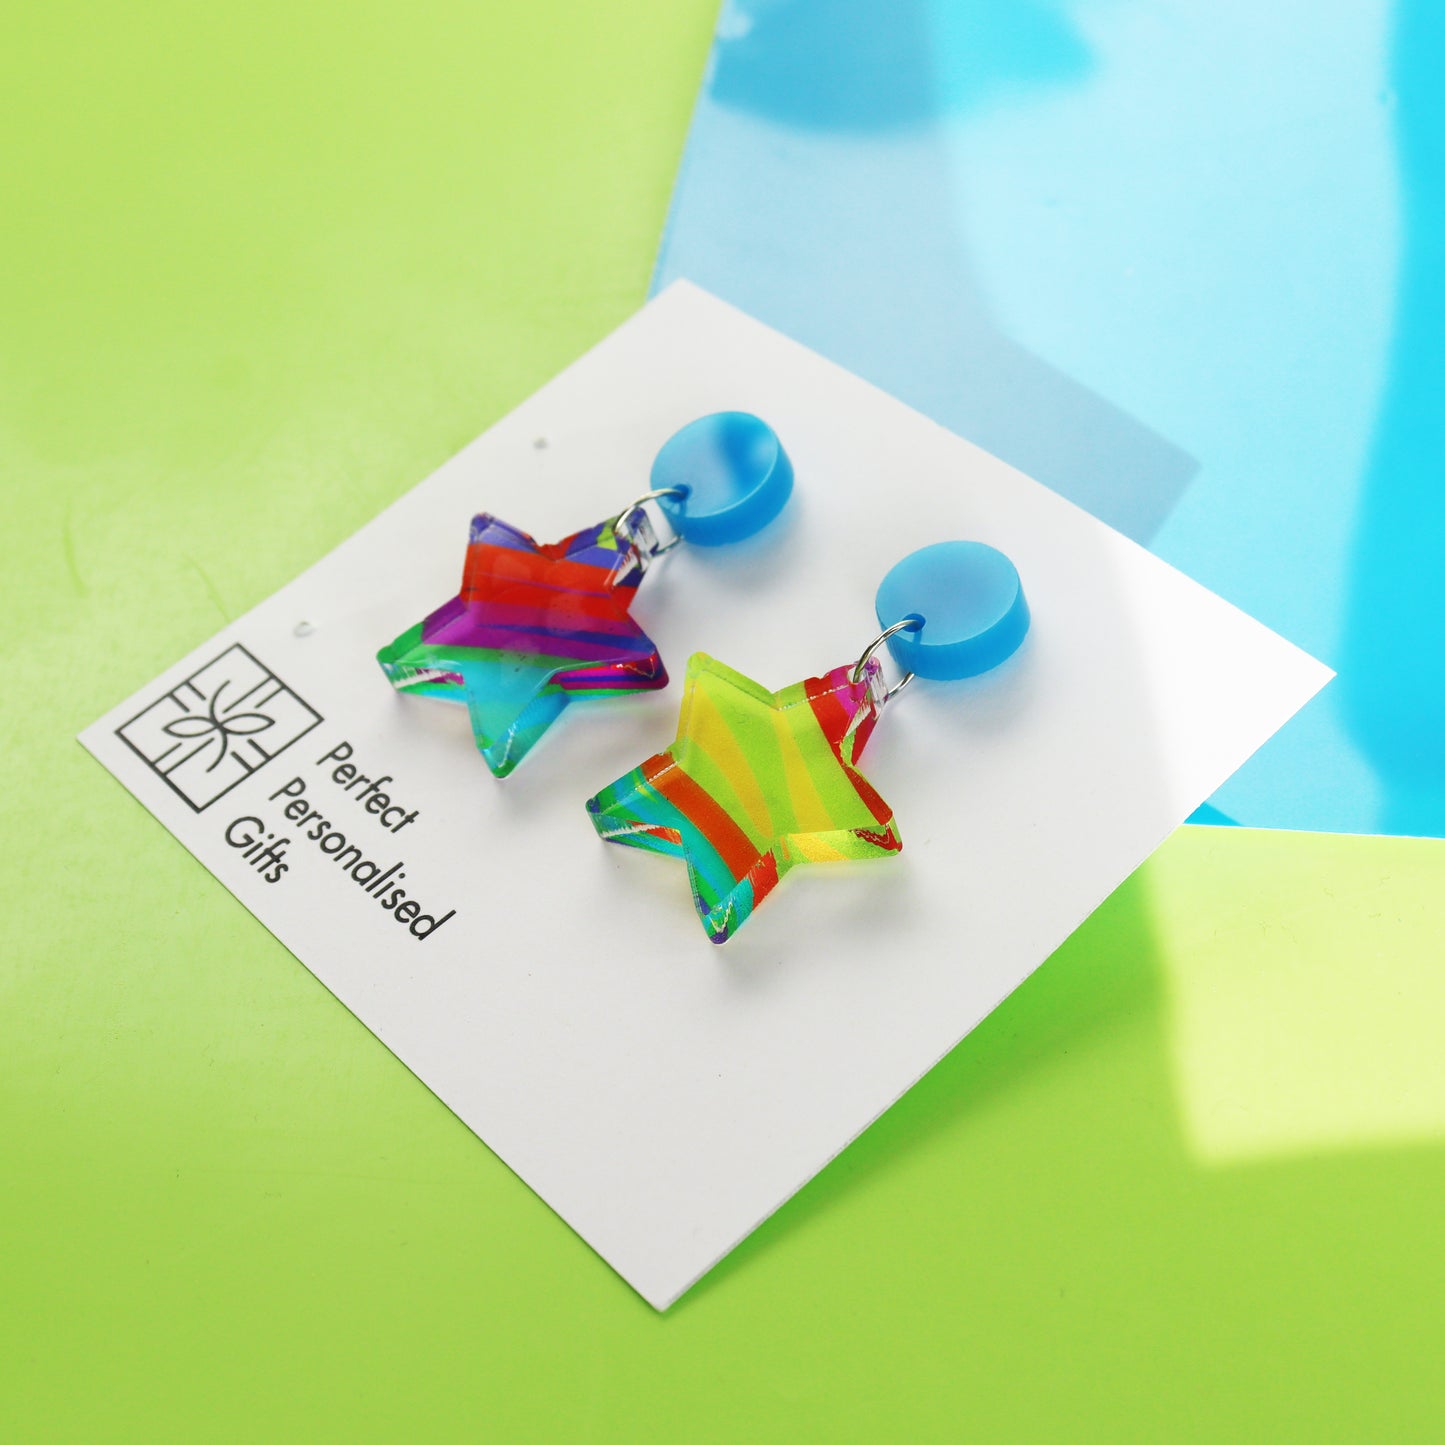 printed acrylic colourful mismatch earrings that have a round blue acrylic stud top and hanging printed acrylic star